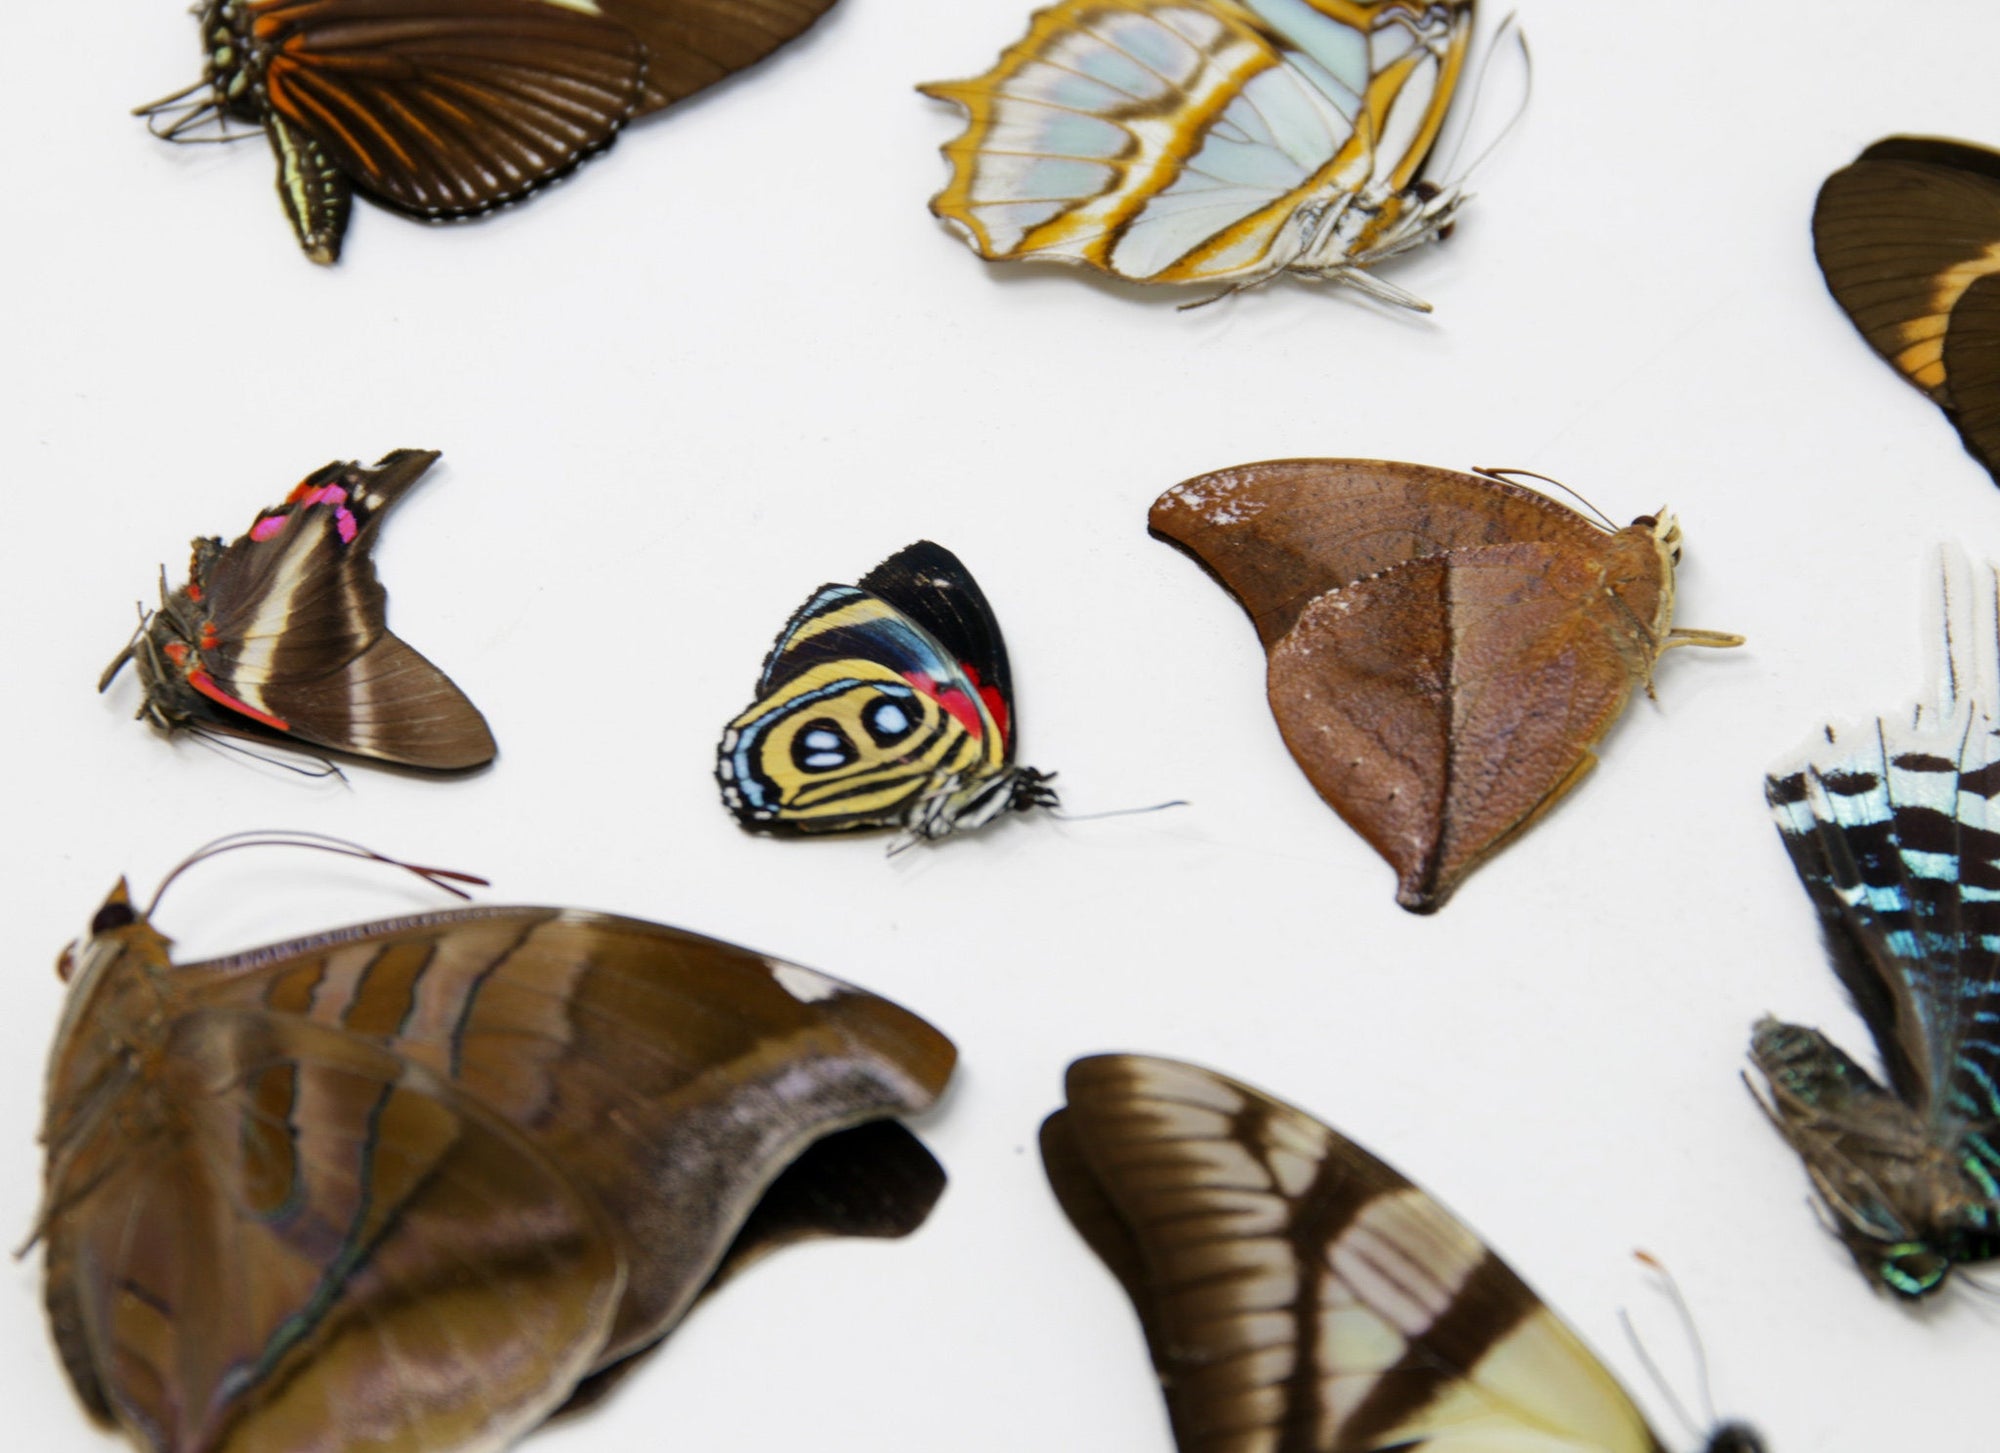 10 Real Butterflies from PERU for Entomology Taxidermy Art